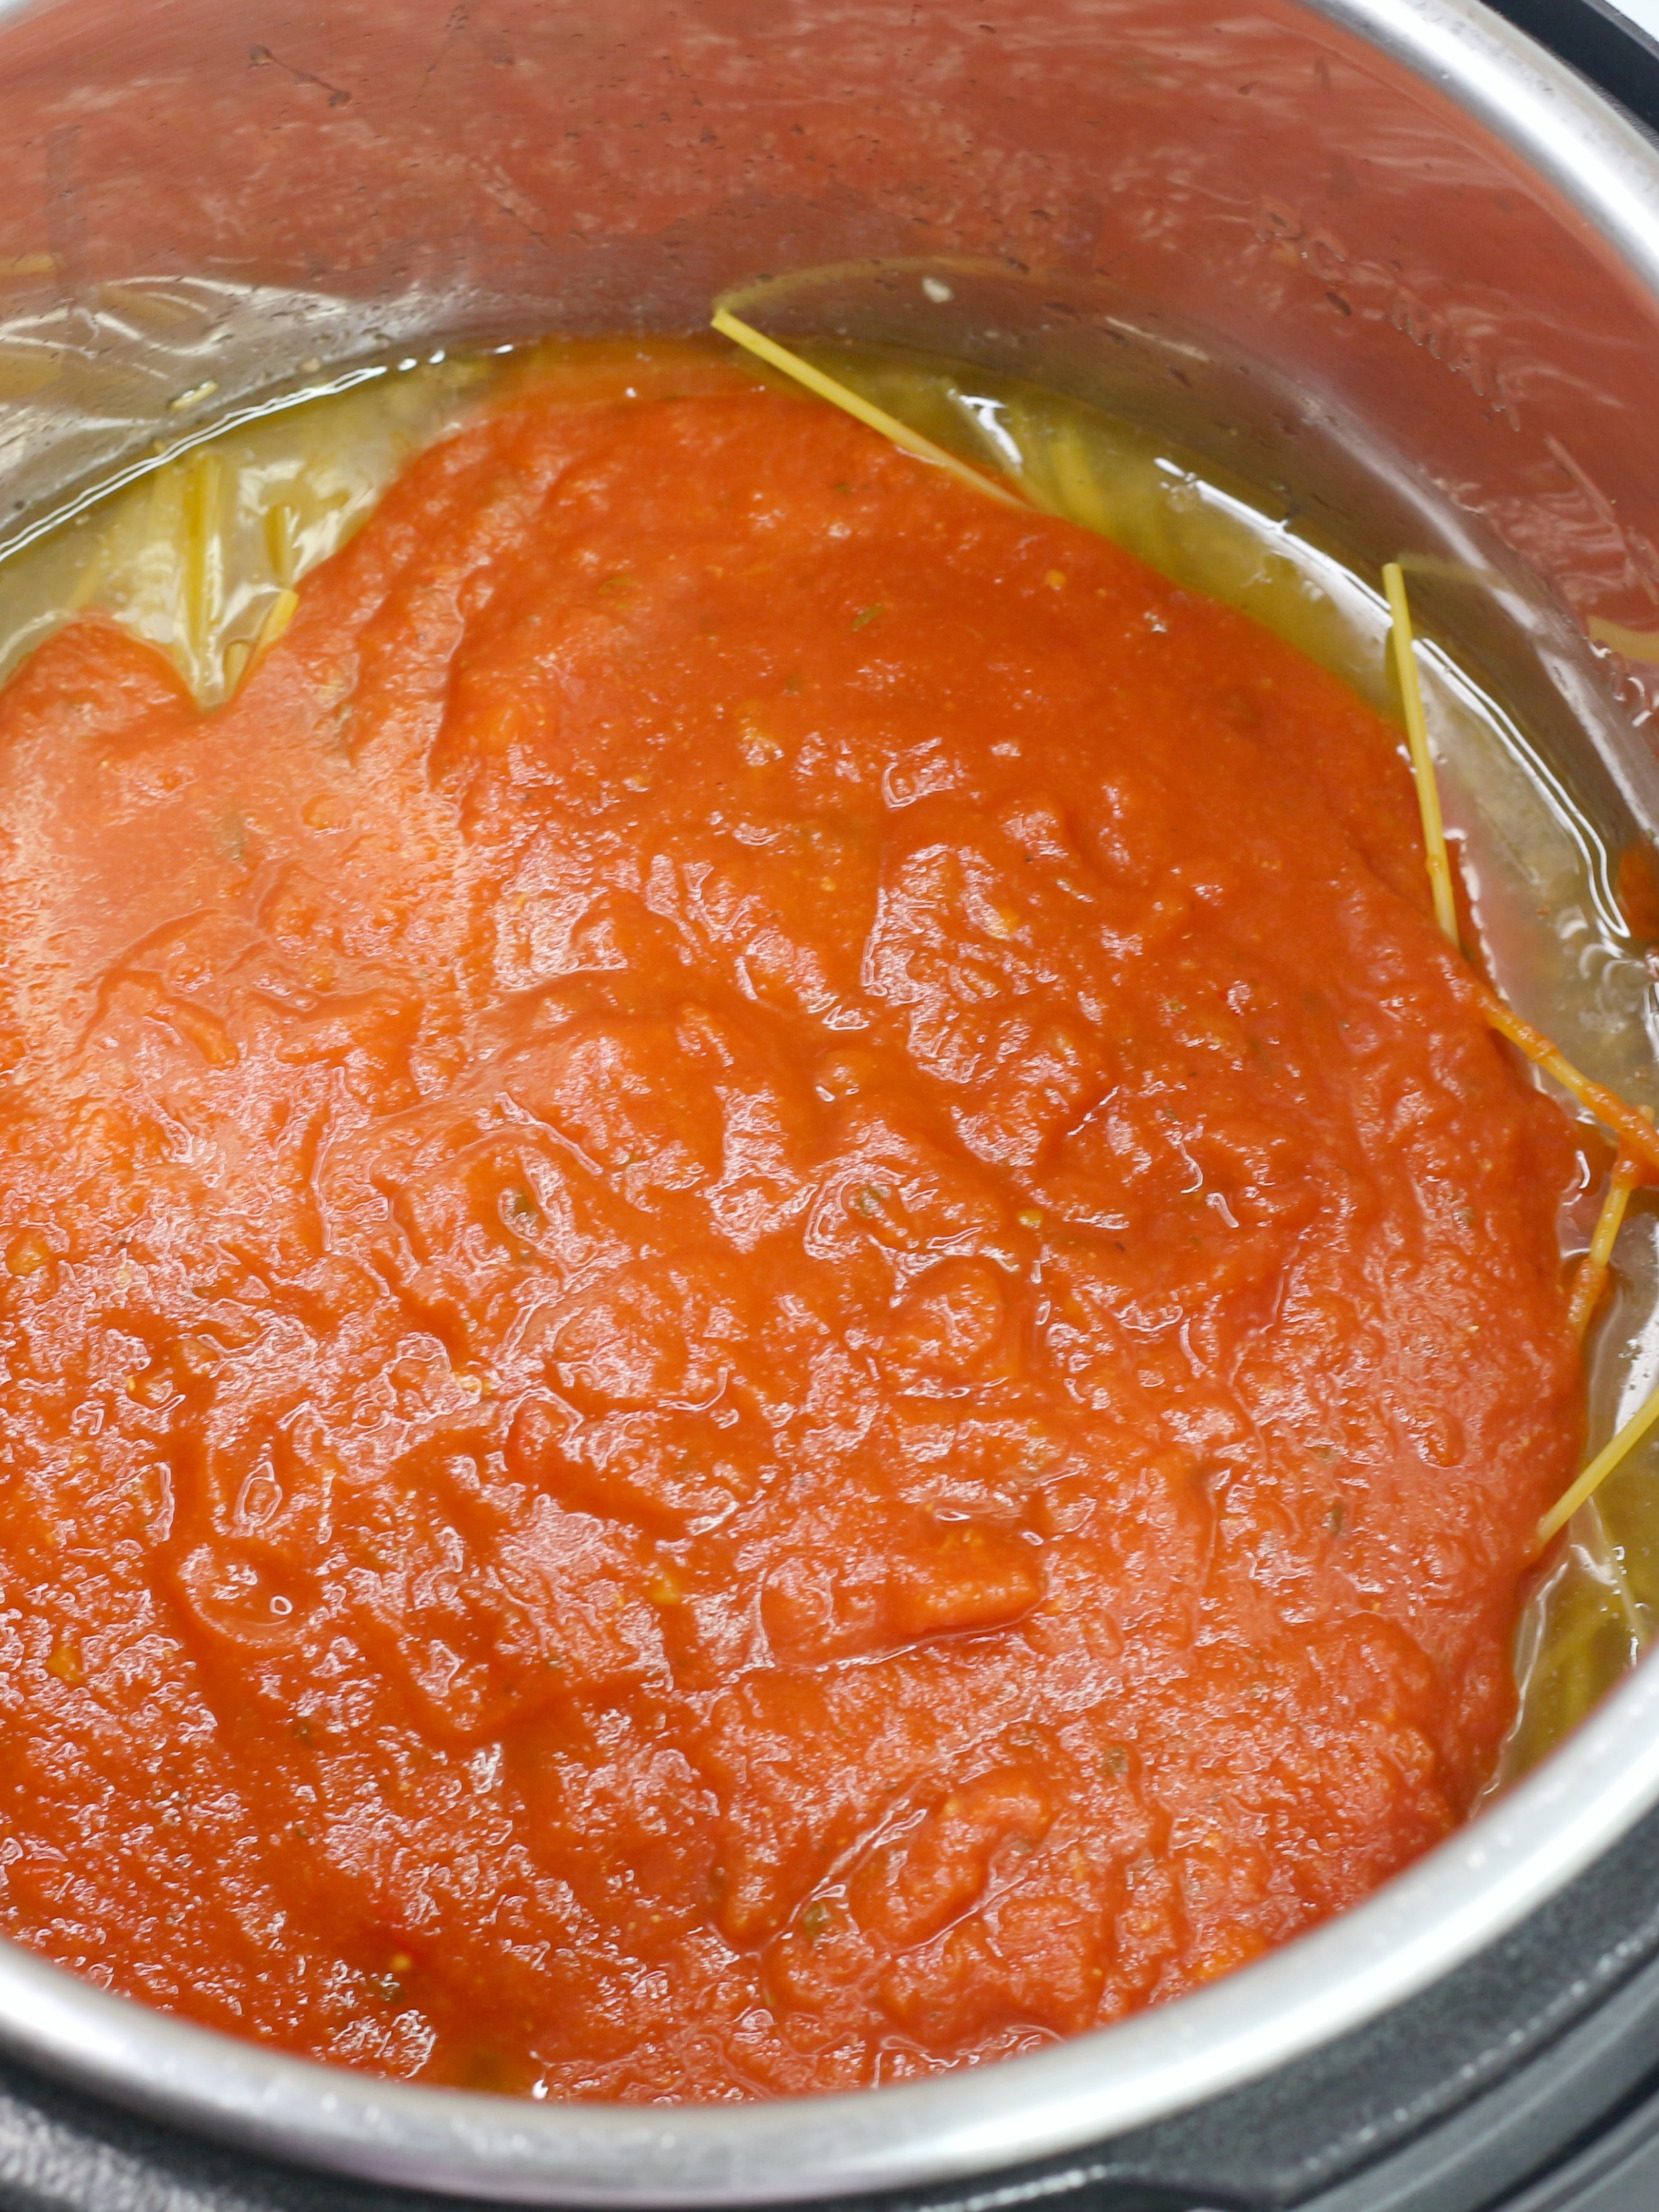 Pour diced tomatoes over the sauce.